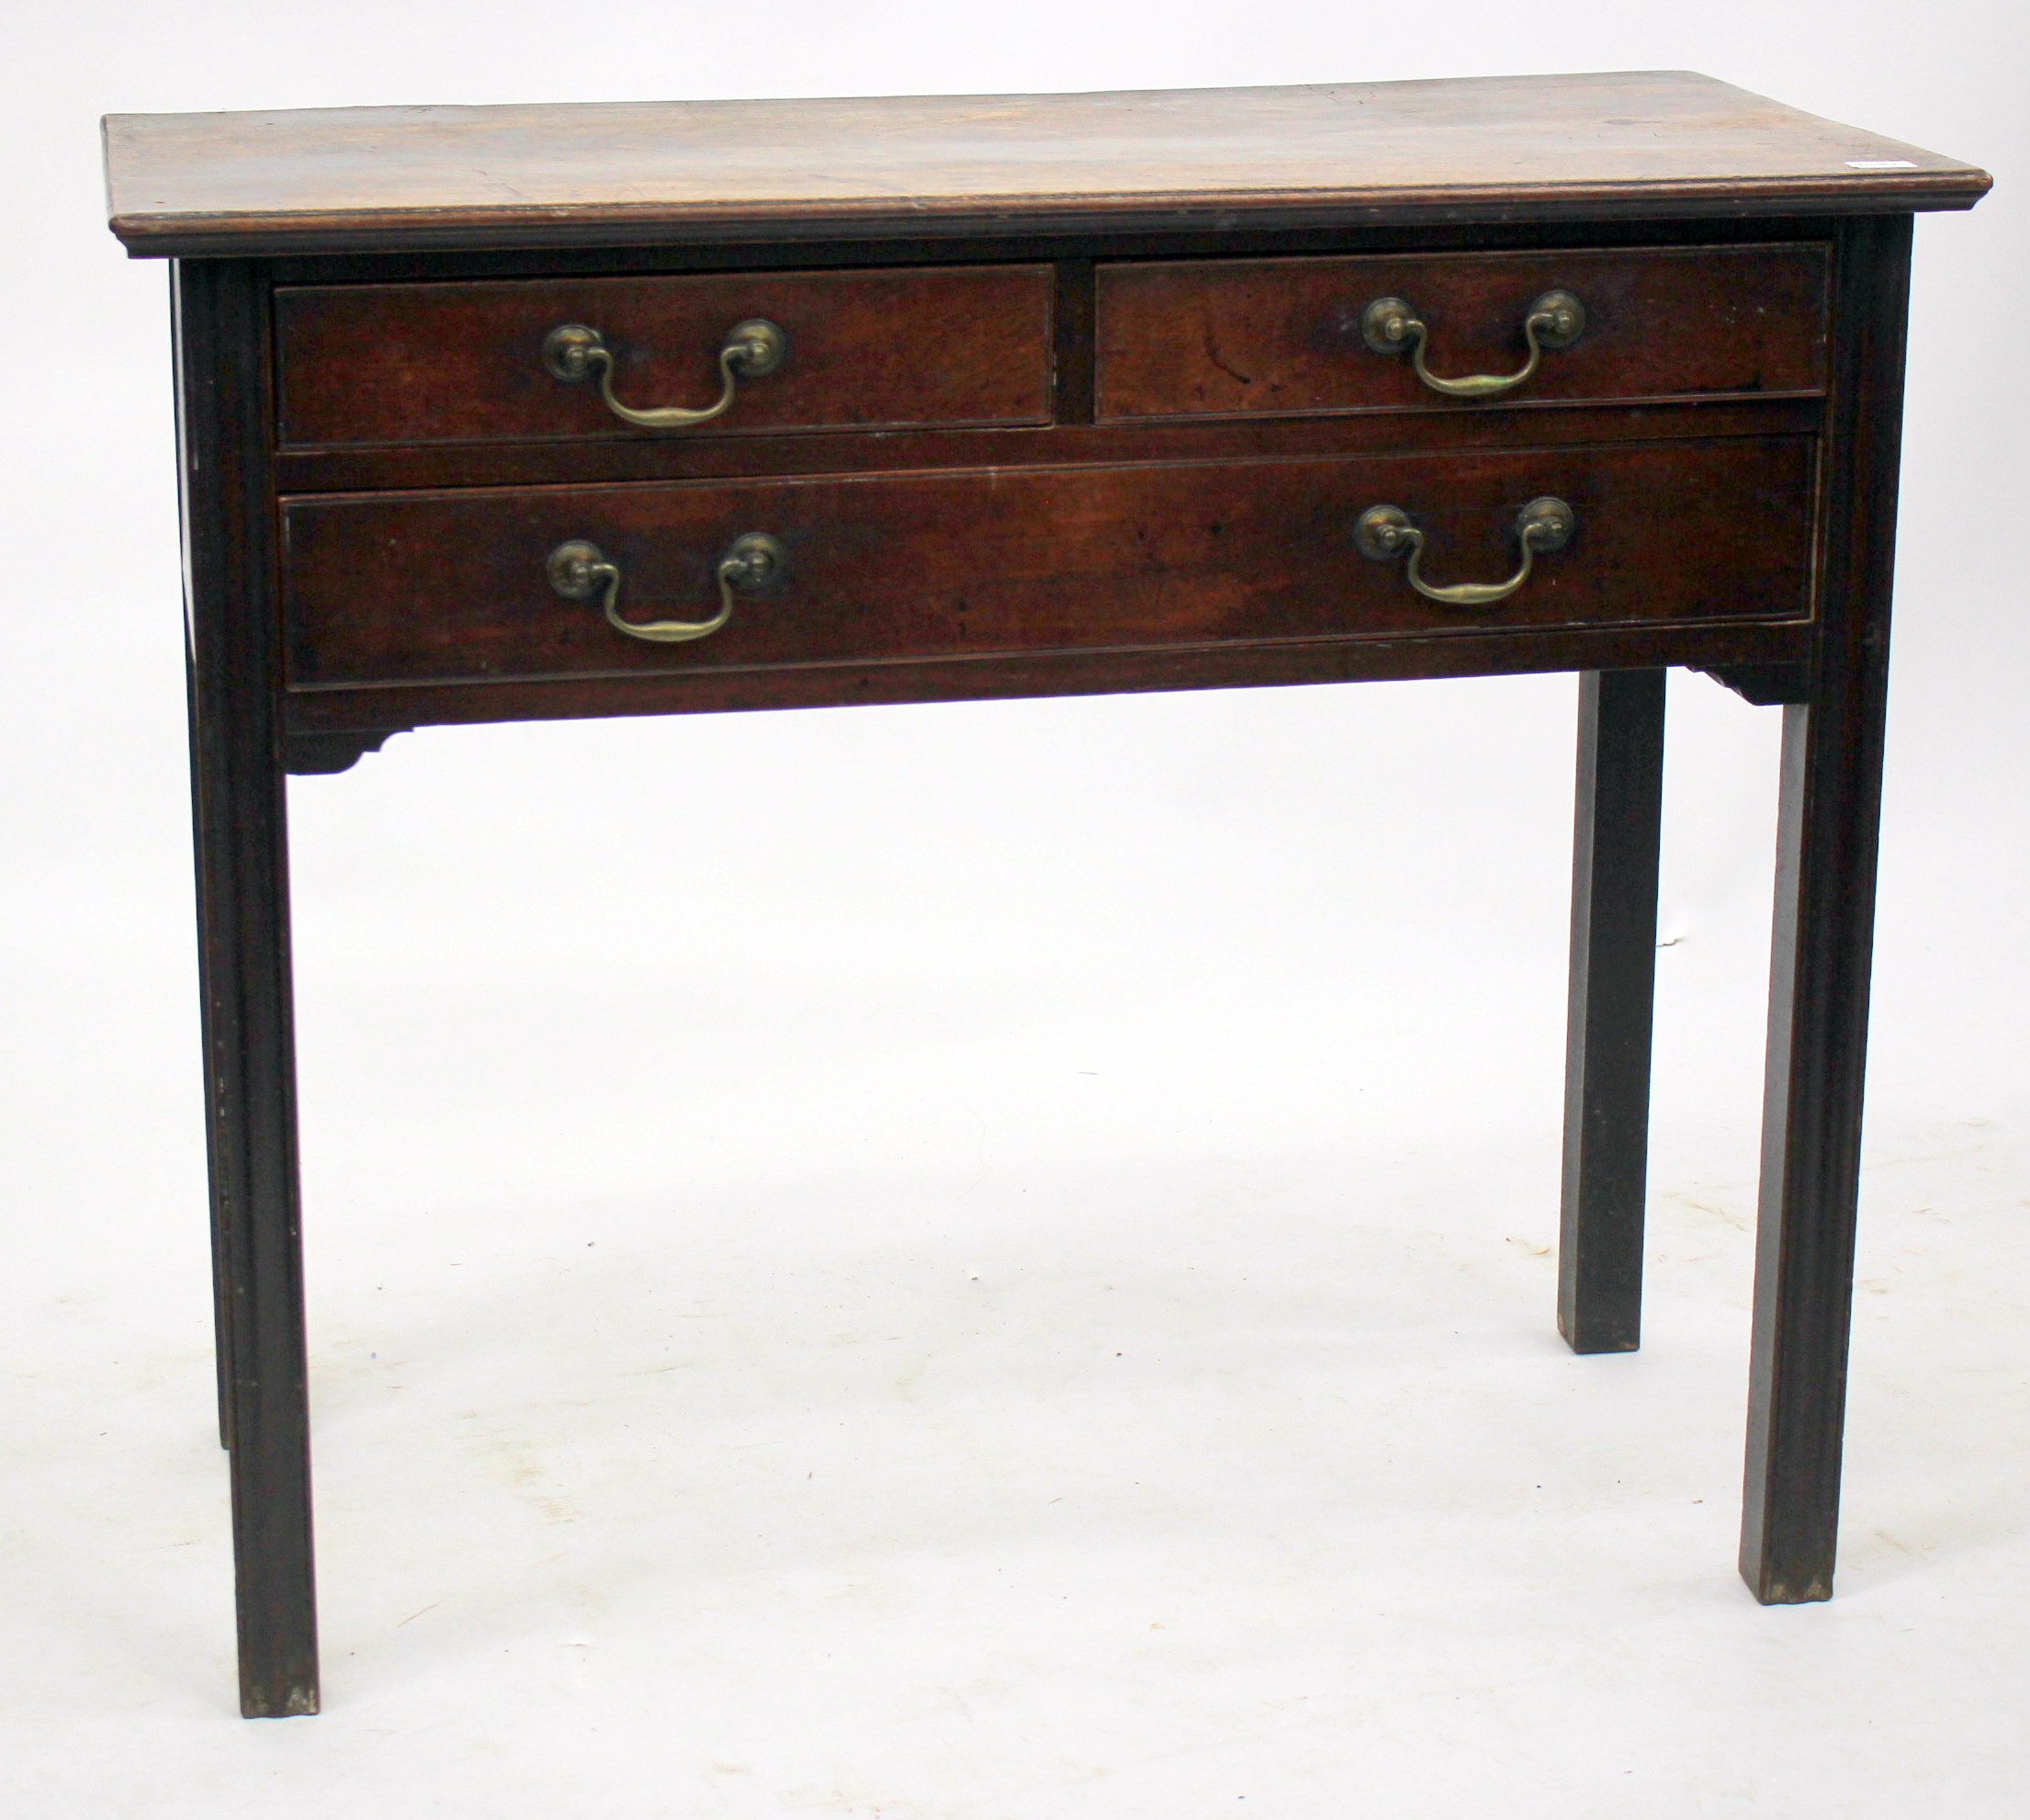 A GEORGE III MAHOGANY SIDE TABLE with two short drawers and one long drawer, all with brass swan